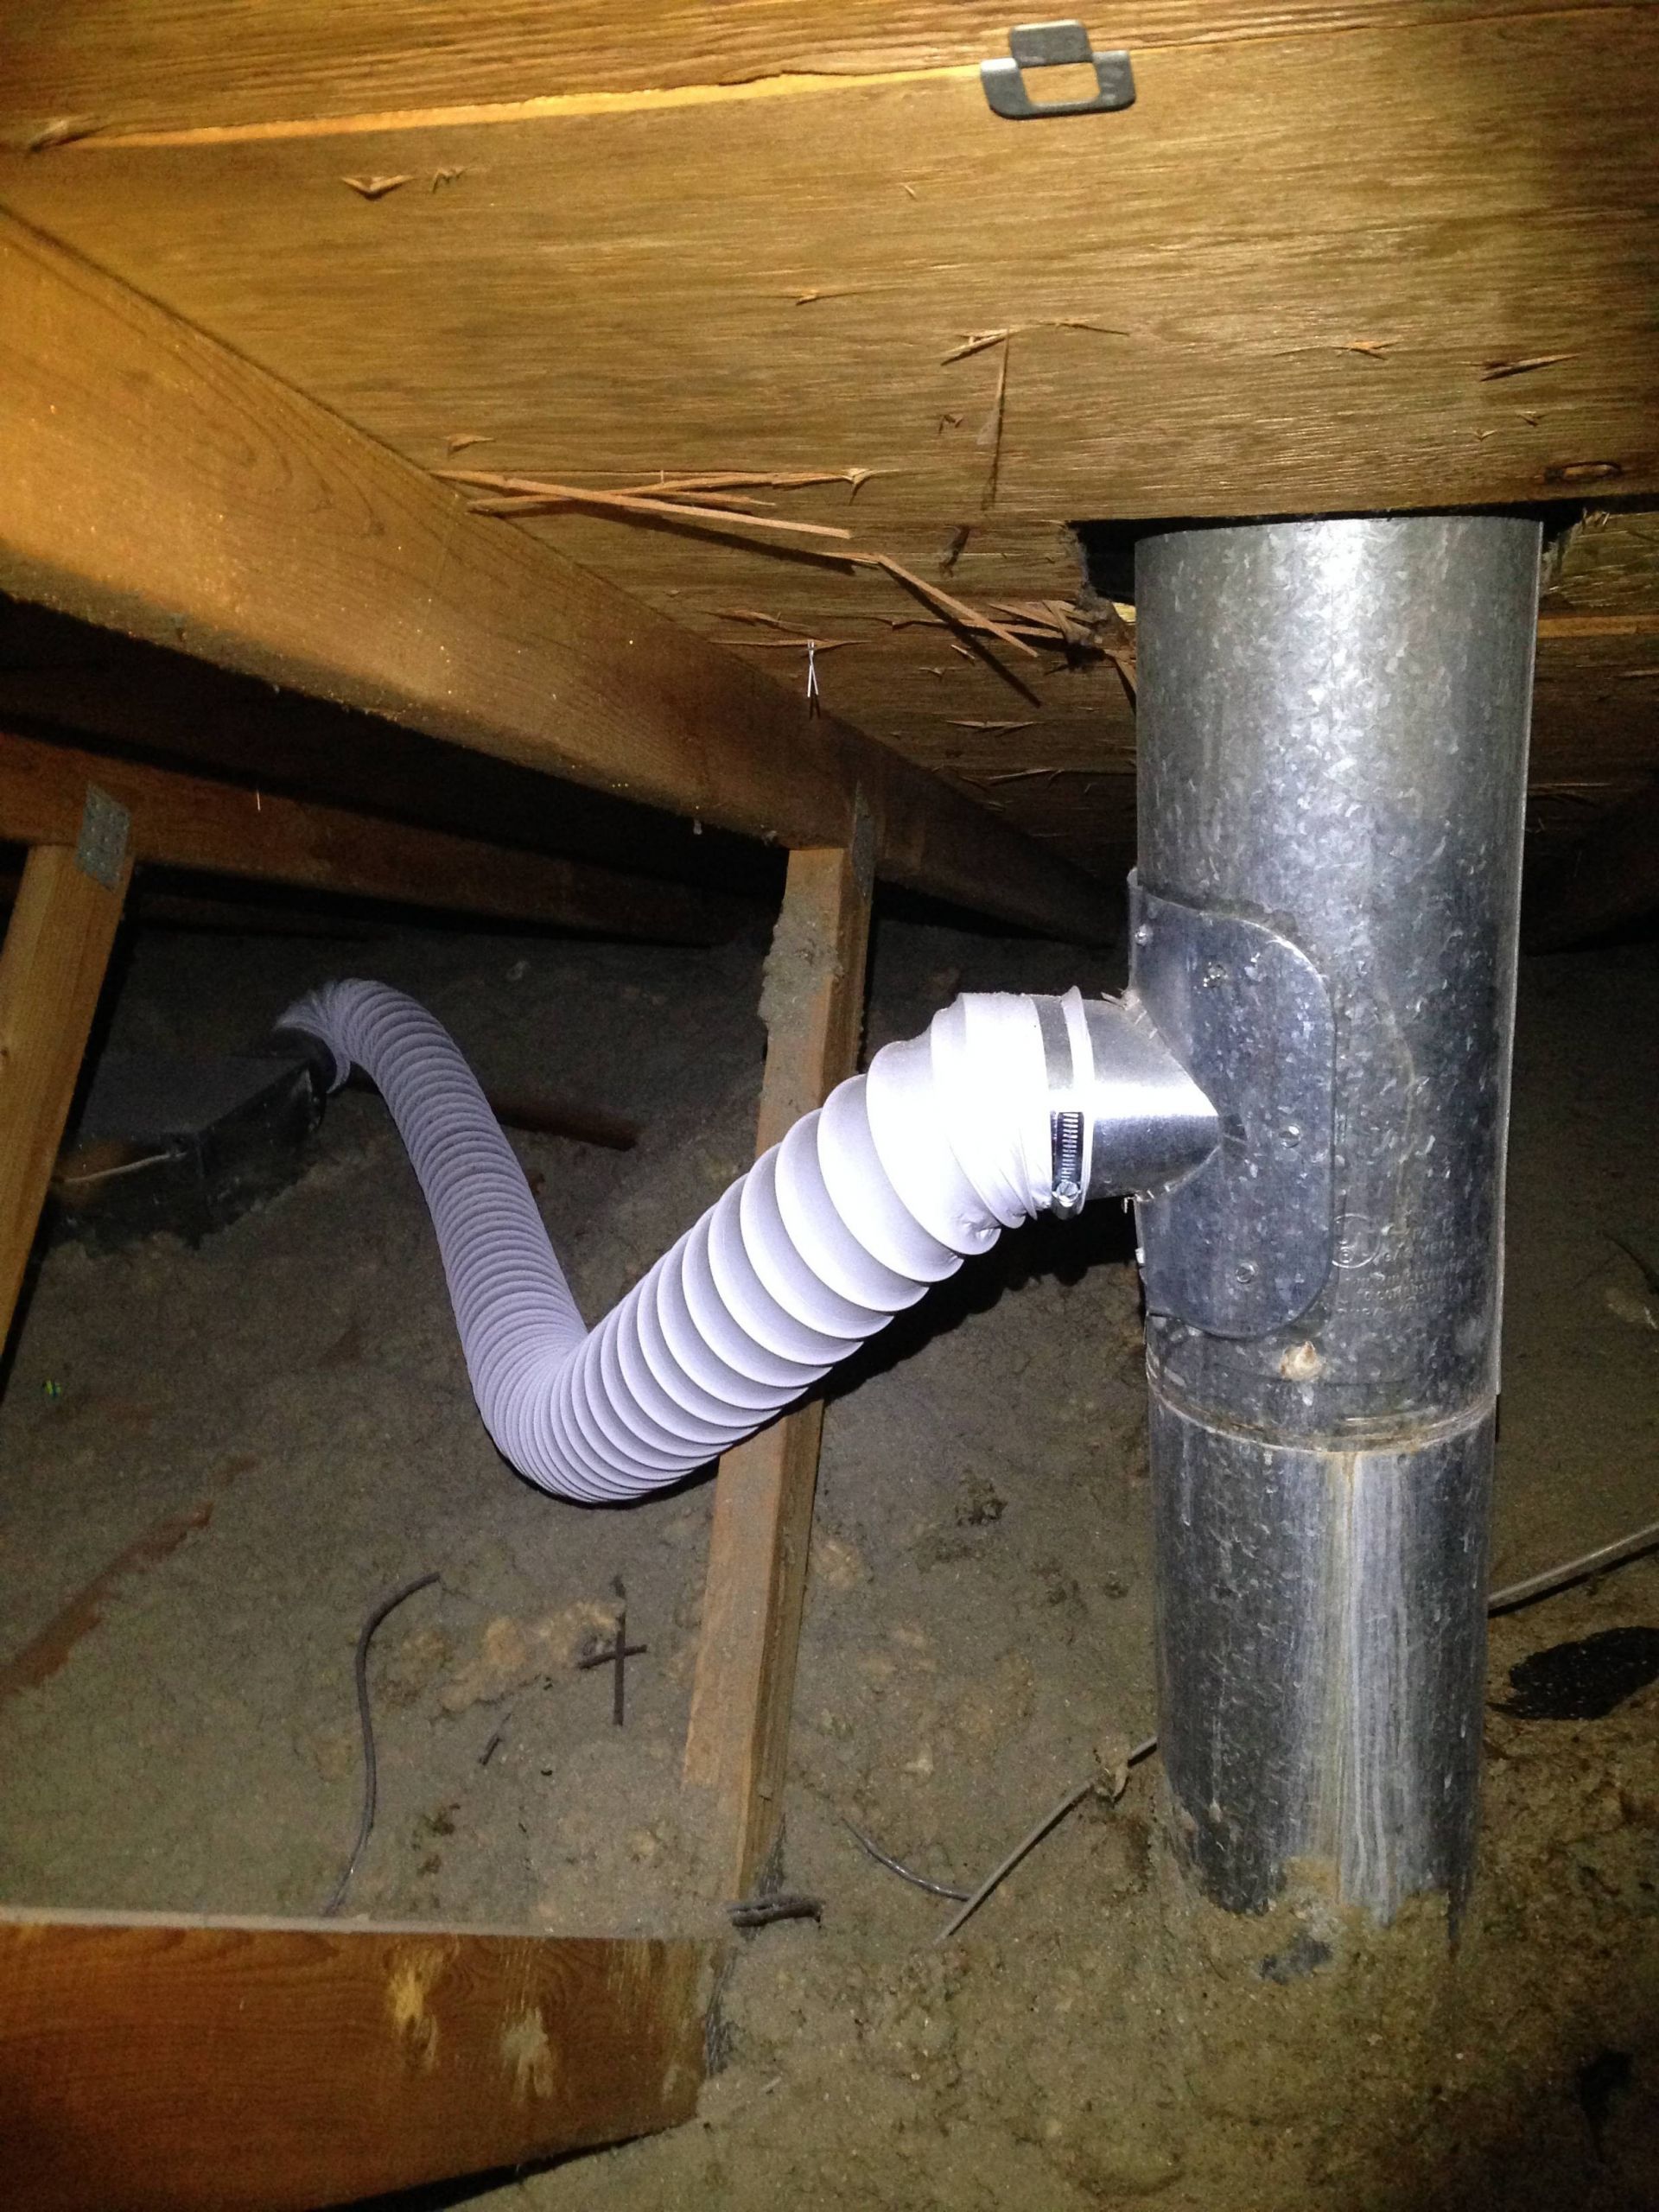 Bathroom Exhaust Vent Pipe
 Bathroom Exhaust Connected To Active Flue Pipe